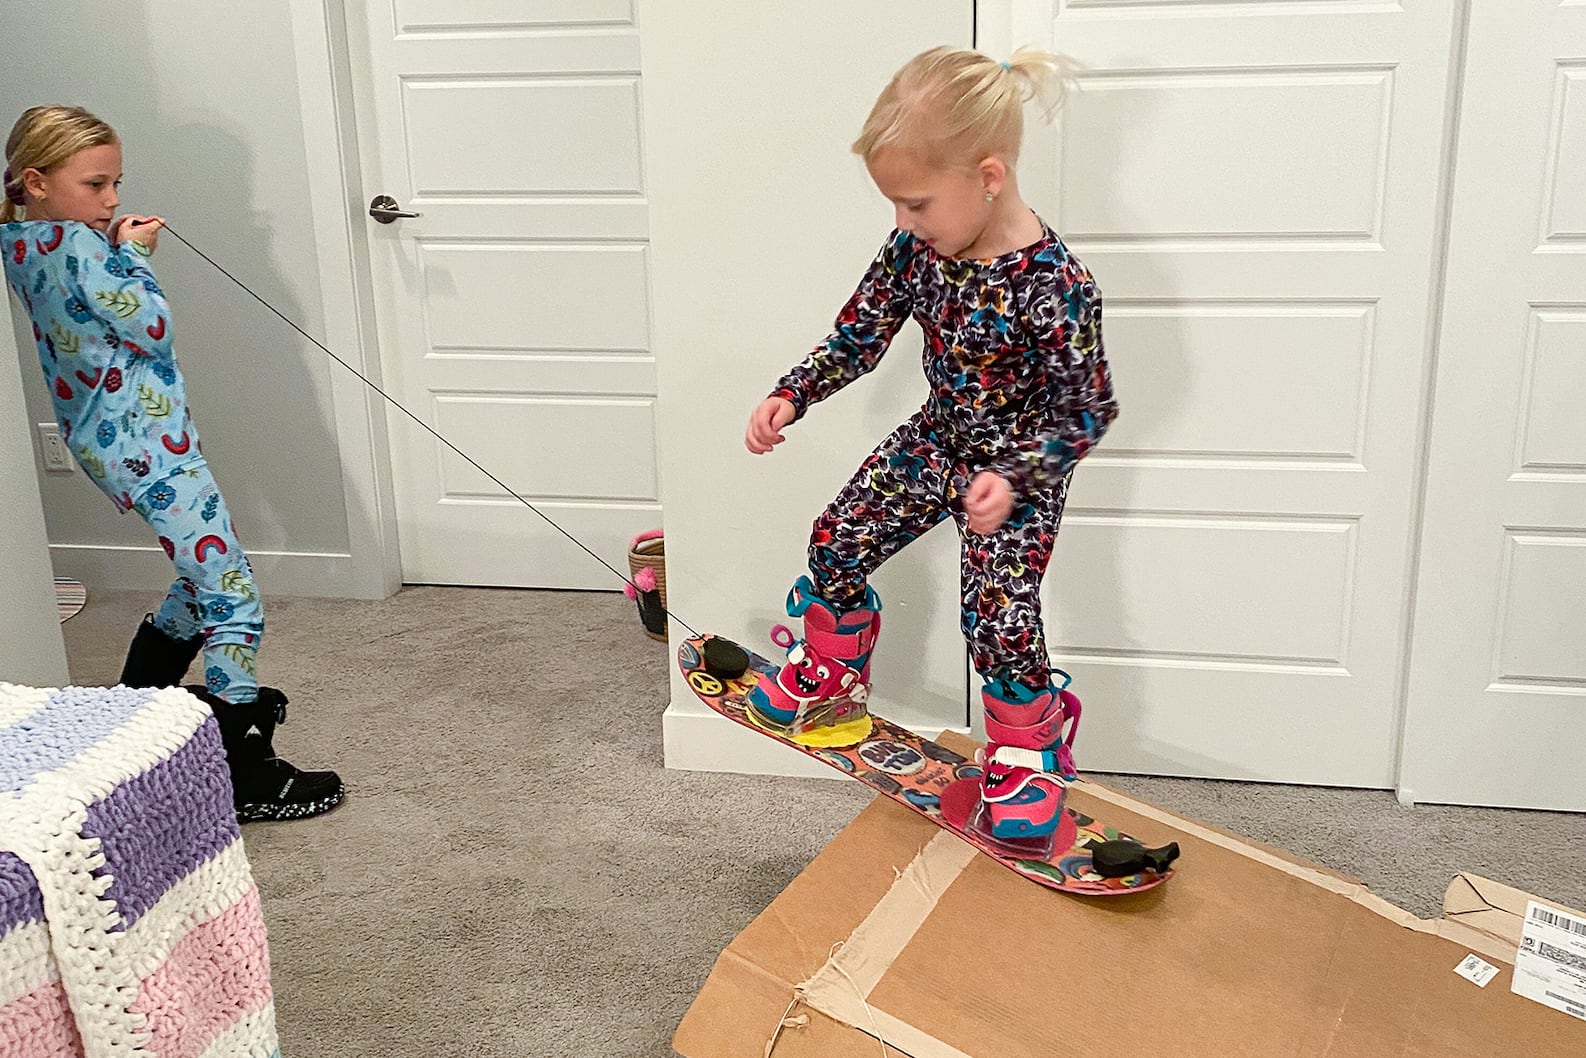 How to Make an Indoor Riglet Park for Kids | Burton Snowboards